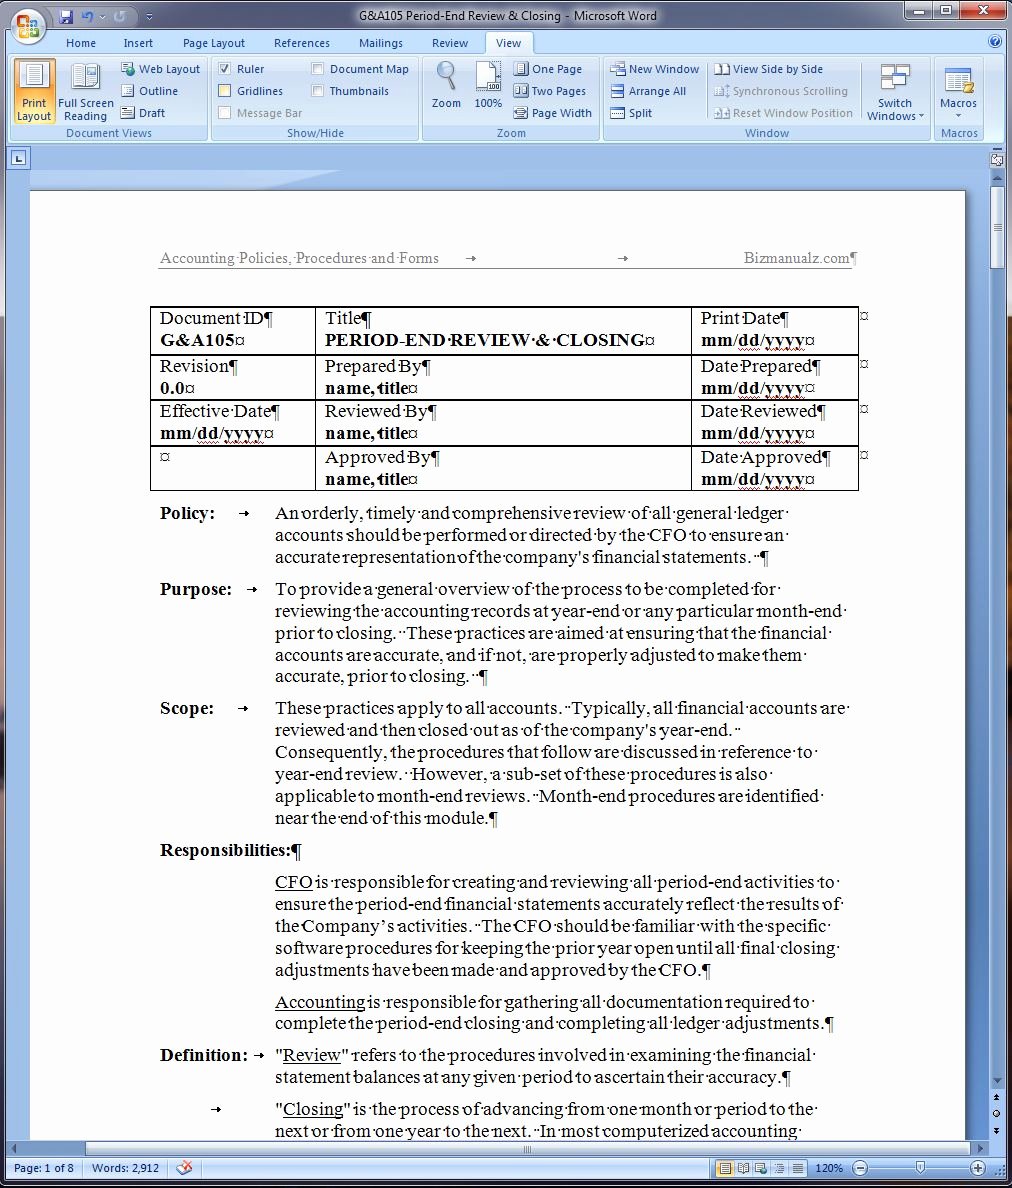 Policy and Procedure Template Best Of Period End Review and Closing Policy and Procedure Word